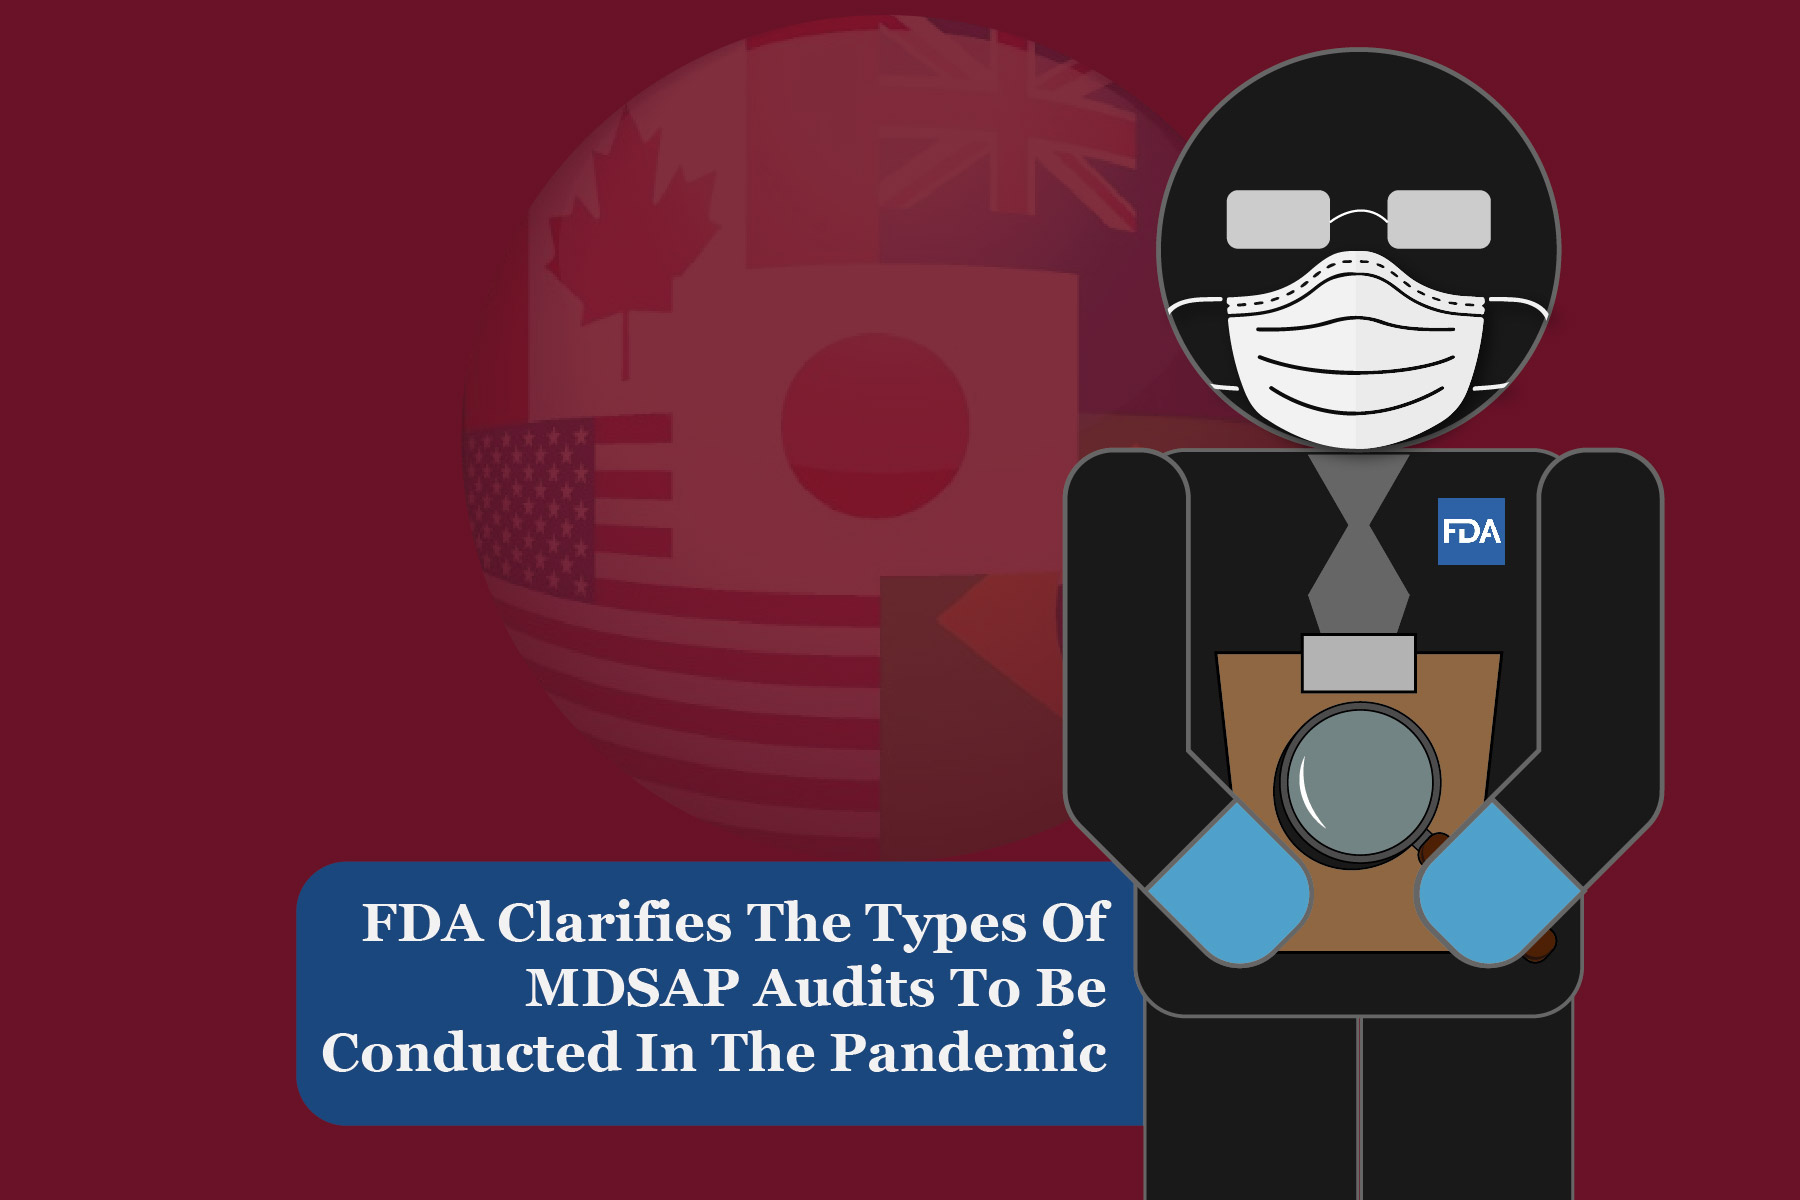 FDA Clarifies The Types Of MDSAP Audits To Be Conducted In The Pandemic